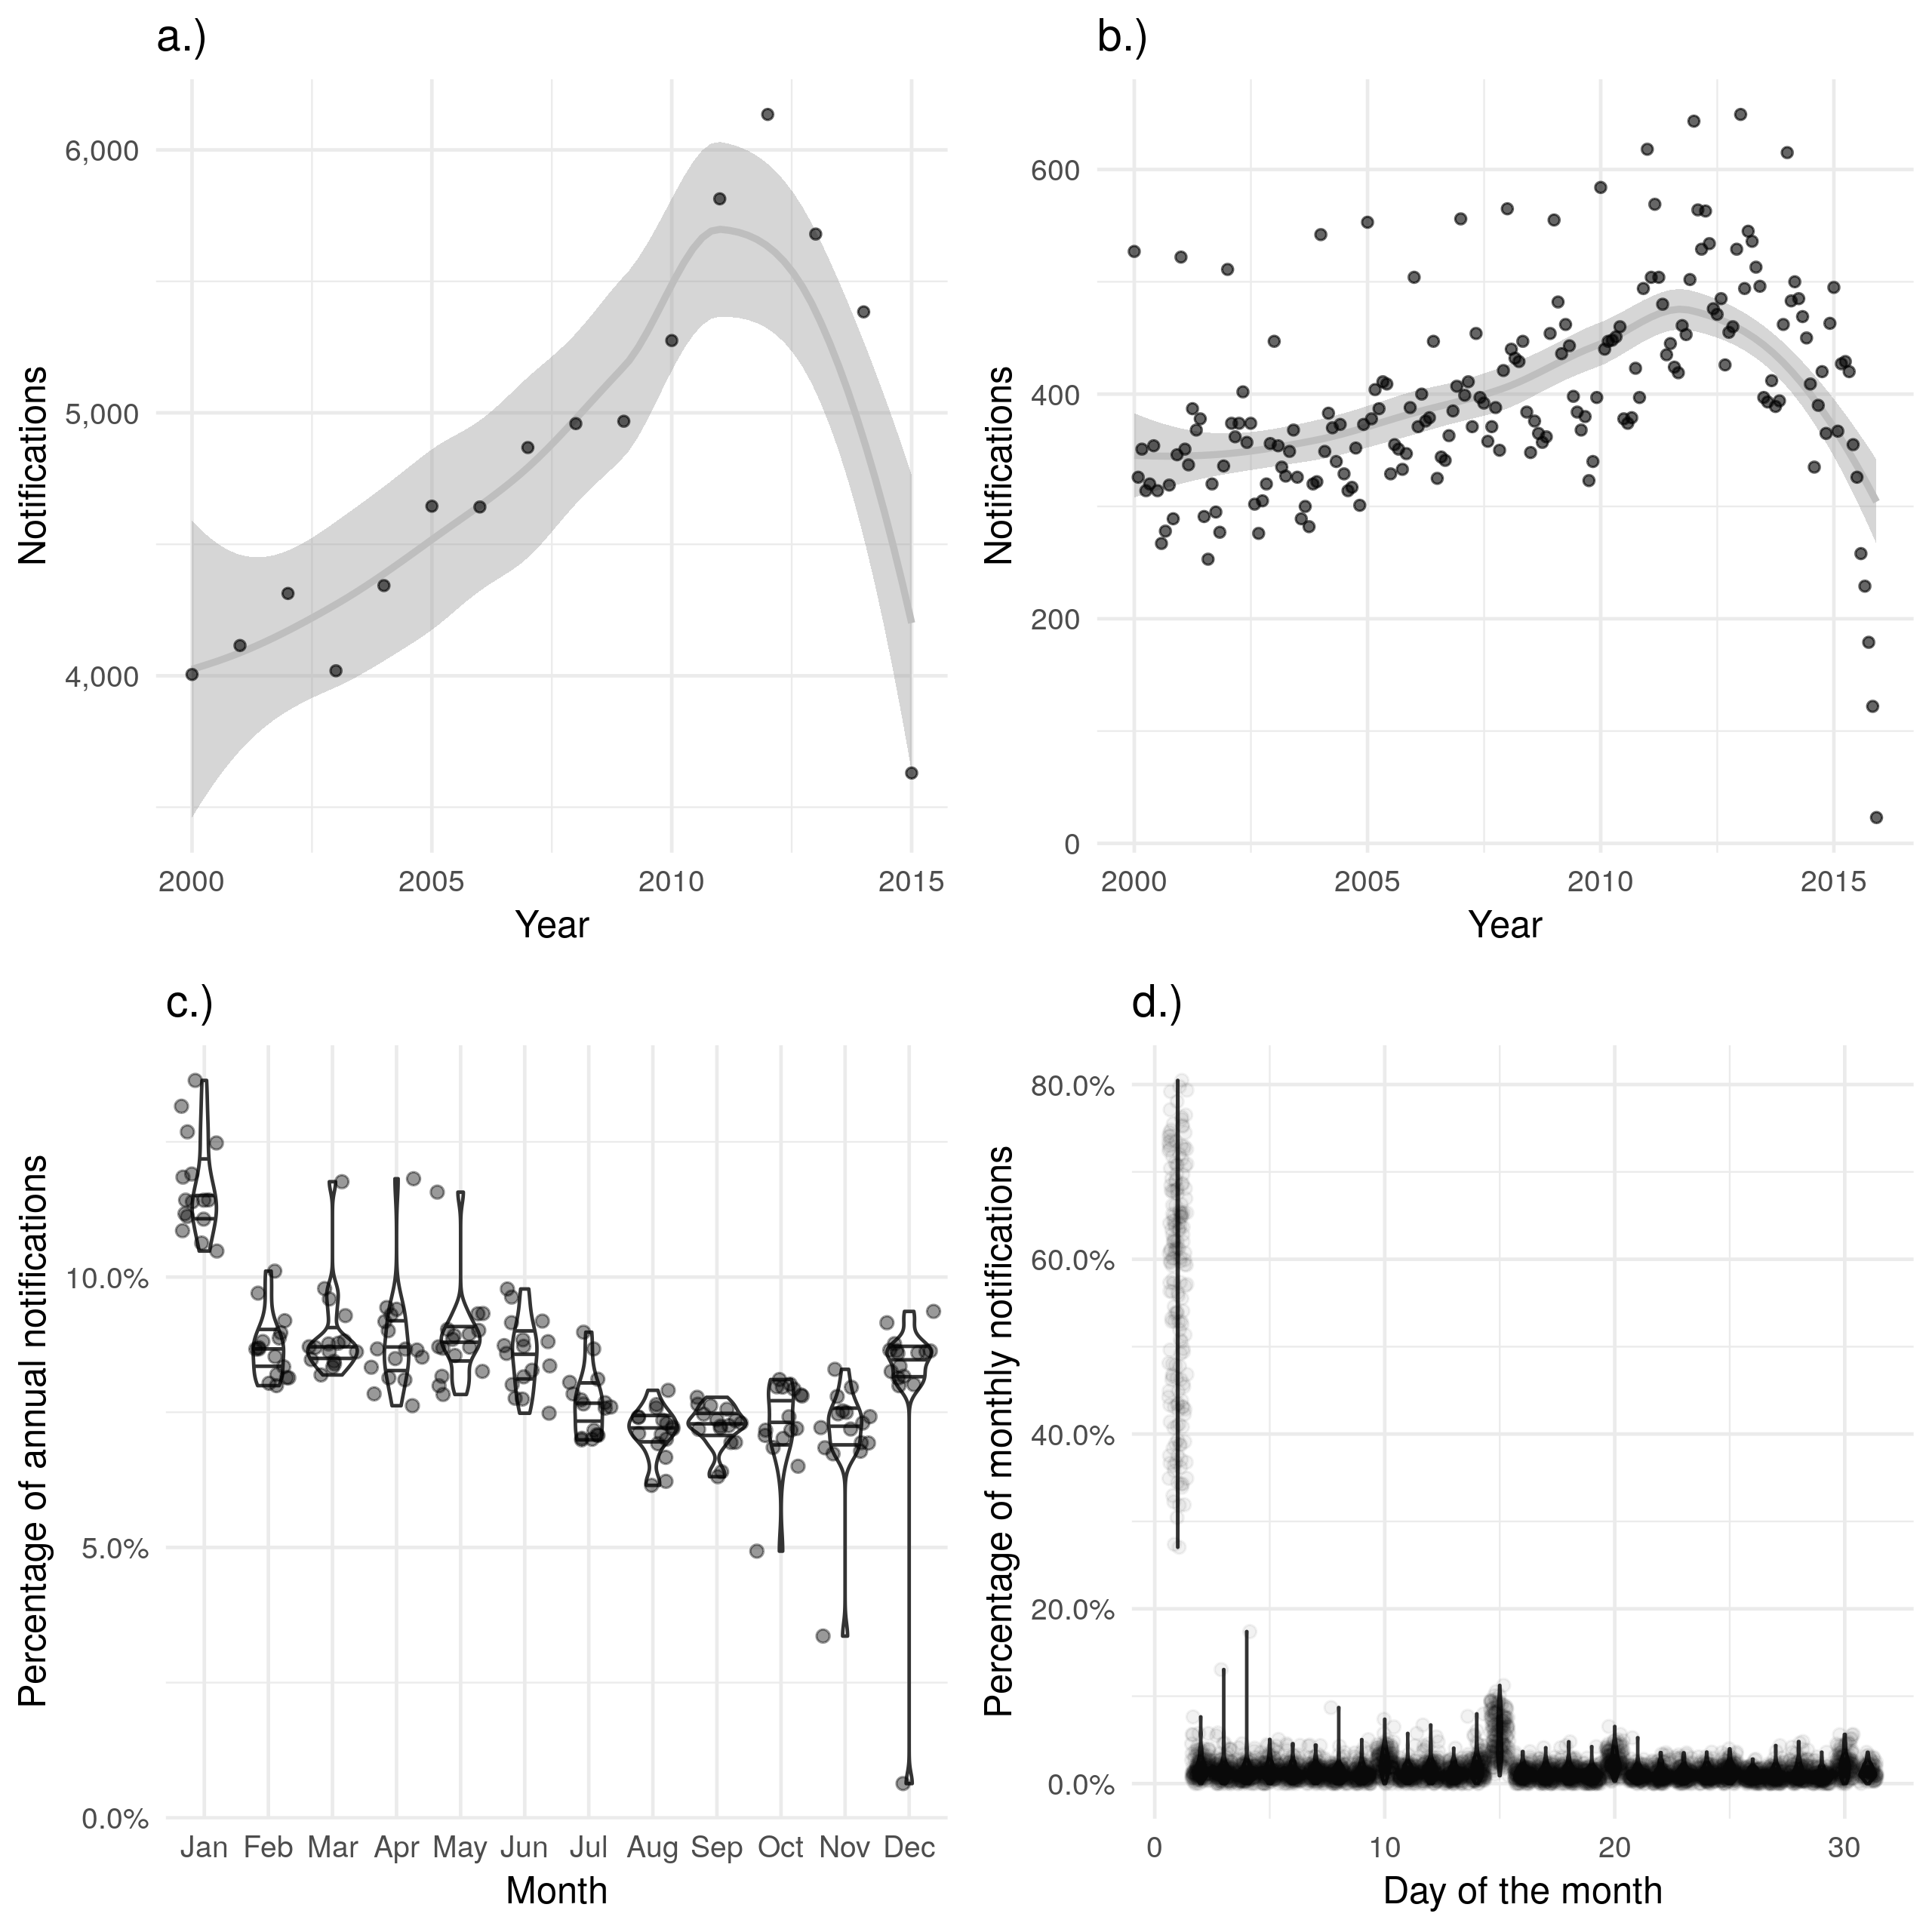 a.) and b.) show notifications over time by date of symptom onset in the ETS, with a.) aggregated by year and  b.) aggregated by month. A trendline has been produced using a locally weighted regression model. Both of these plots show the same overall trend, but b.) contains a large amount of apparent noise. c.) Shows the proportion of cases notified in a given month for each year, with some evidence of a seasonal trend and a higher proportion of cases reporting symptoms starting in January than would be expected. d.) Shows the proportion of cases notified on a given day for each month, with a much higher proportion of cases reproting symptoms on the first of the month than would be expected. On both the scale of months and years there is some evidence of recall bias, with the first month, or first day, reporting higher proportions of cases than would be expected.